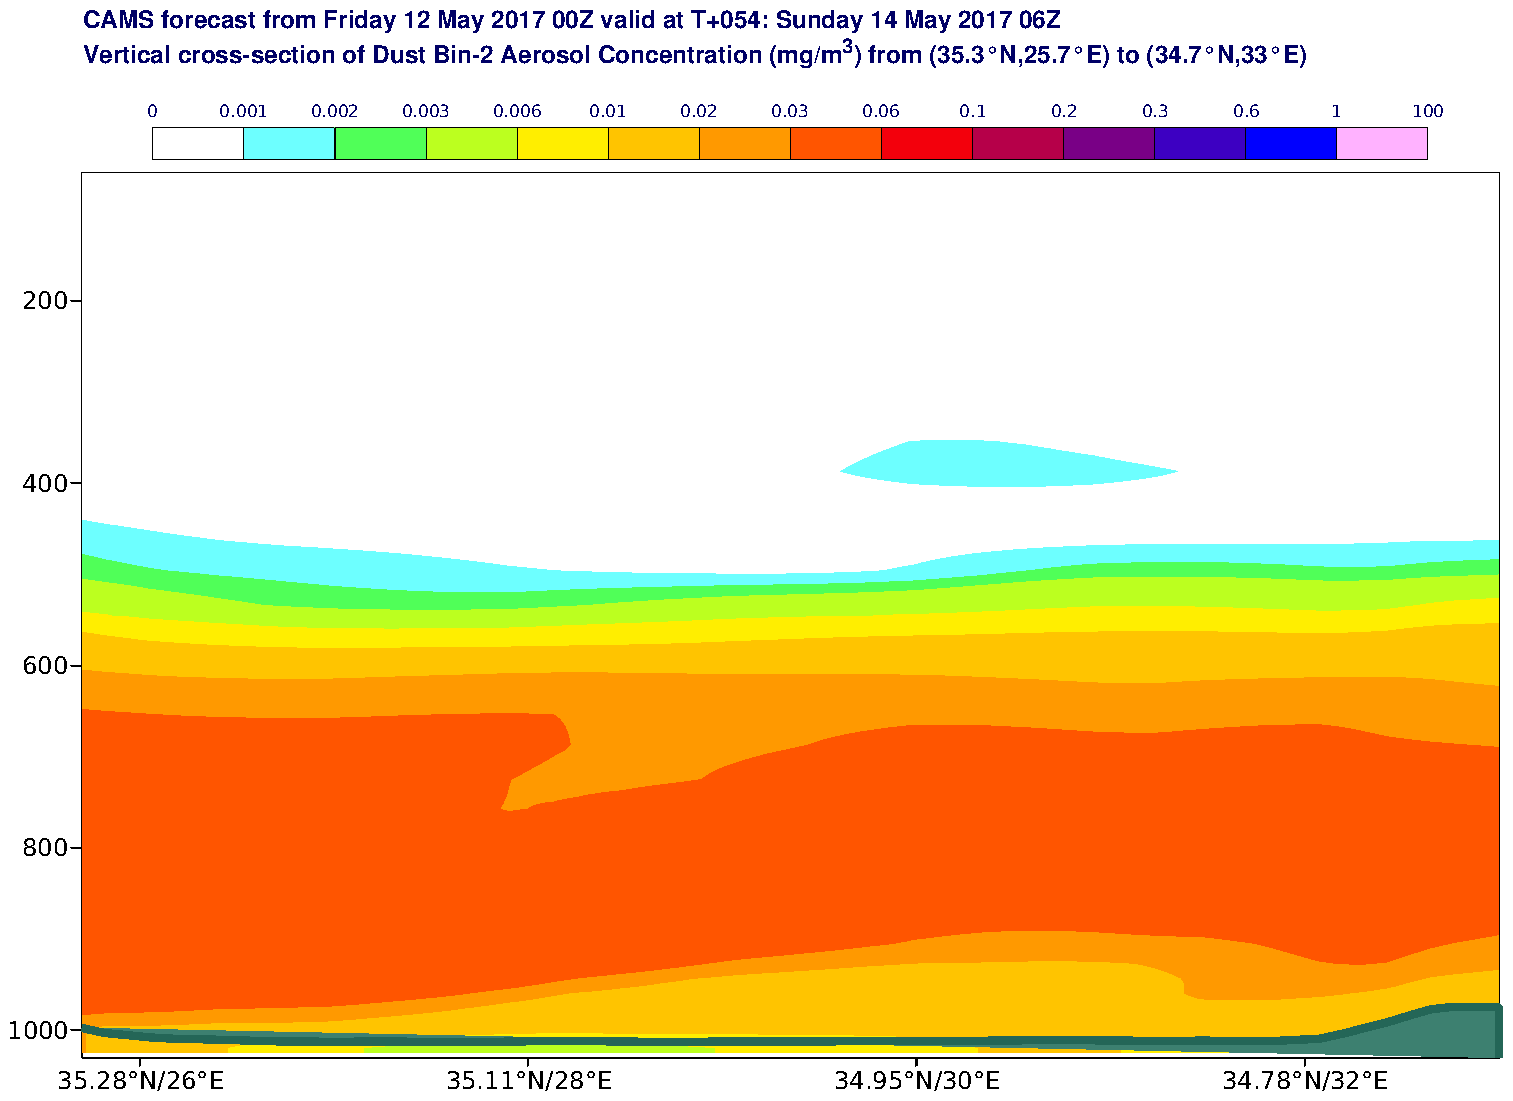 Vertical cross-section of Dust Bin-2 Aerosol Concentration (mg/m3) valid at T54 - 2017-05-14 06:00